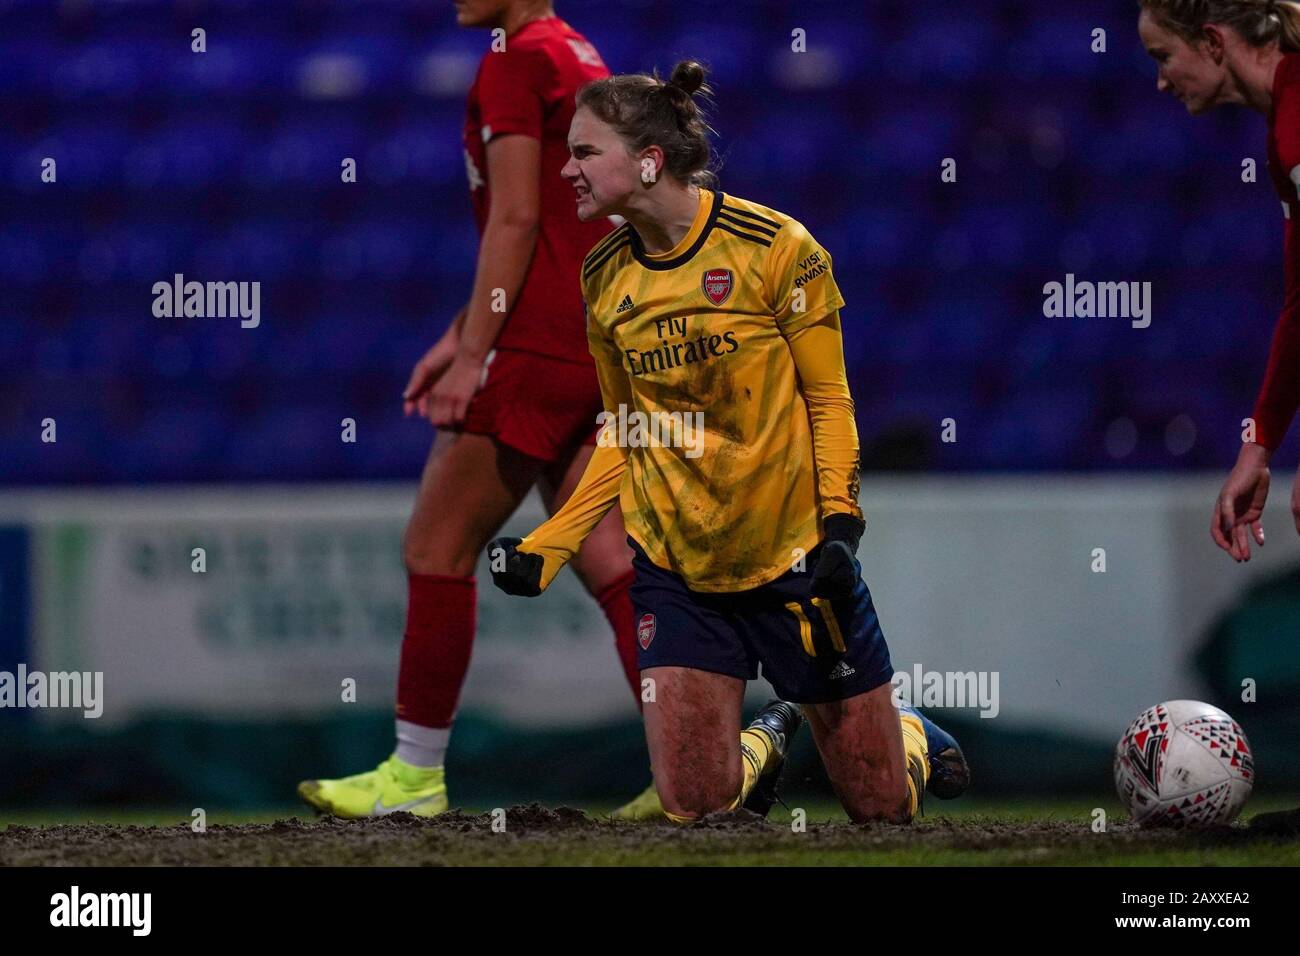 CHESTER. ENGLAND. FEB 13th: Vivianne Miedema of Arsenal celebrates the winning goal  during the Women’s Super League game between Liverpool Women and Arsenal Women at The Deva Stadium in Chester, England. (Photo by Daniela Porcelli/SPP) Stock Photo